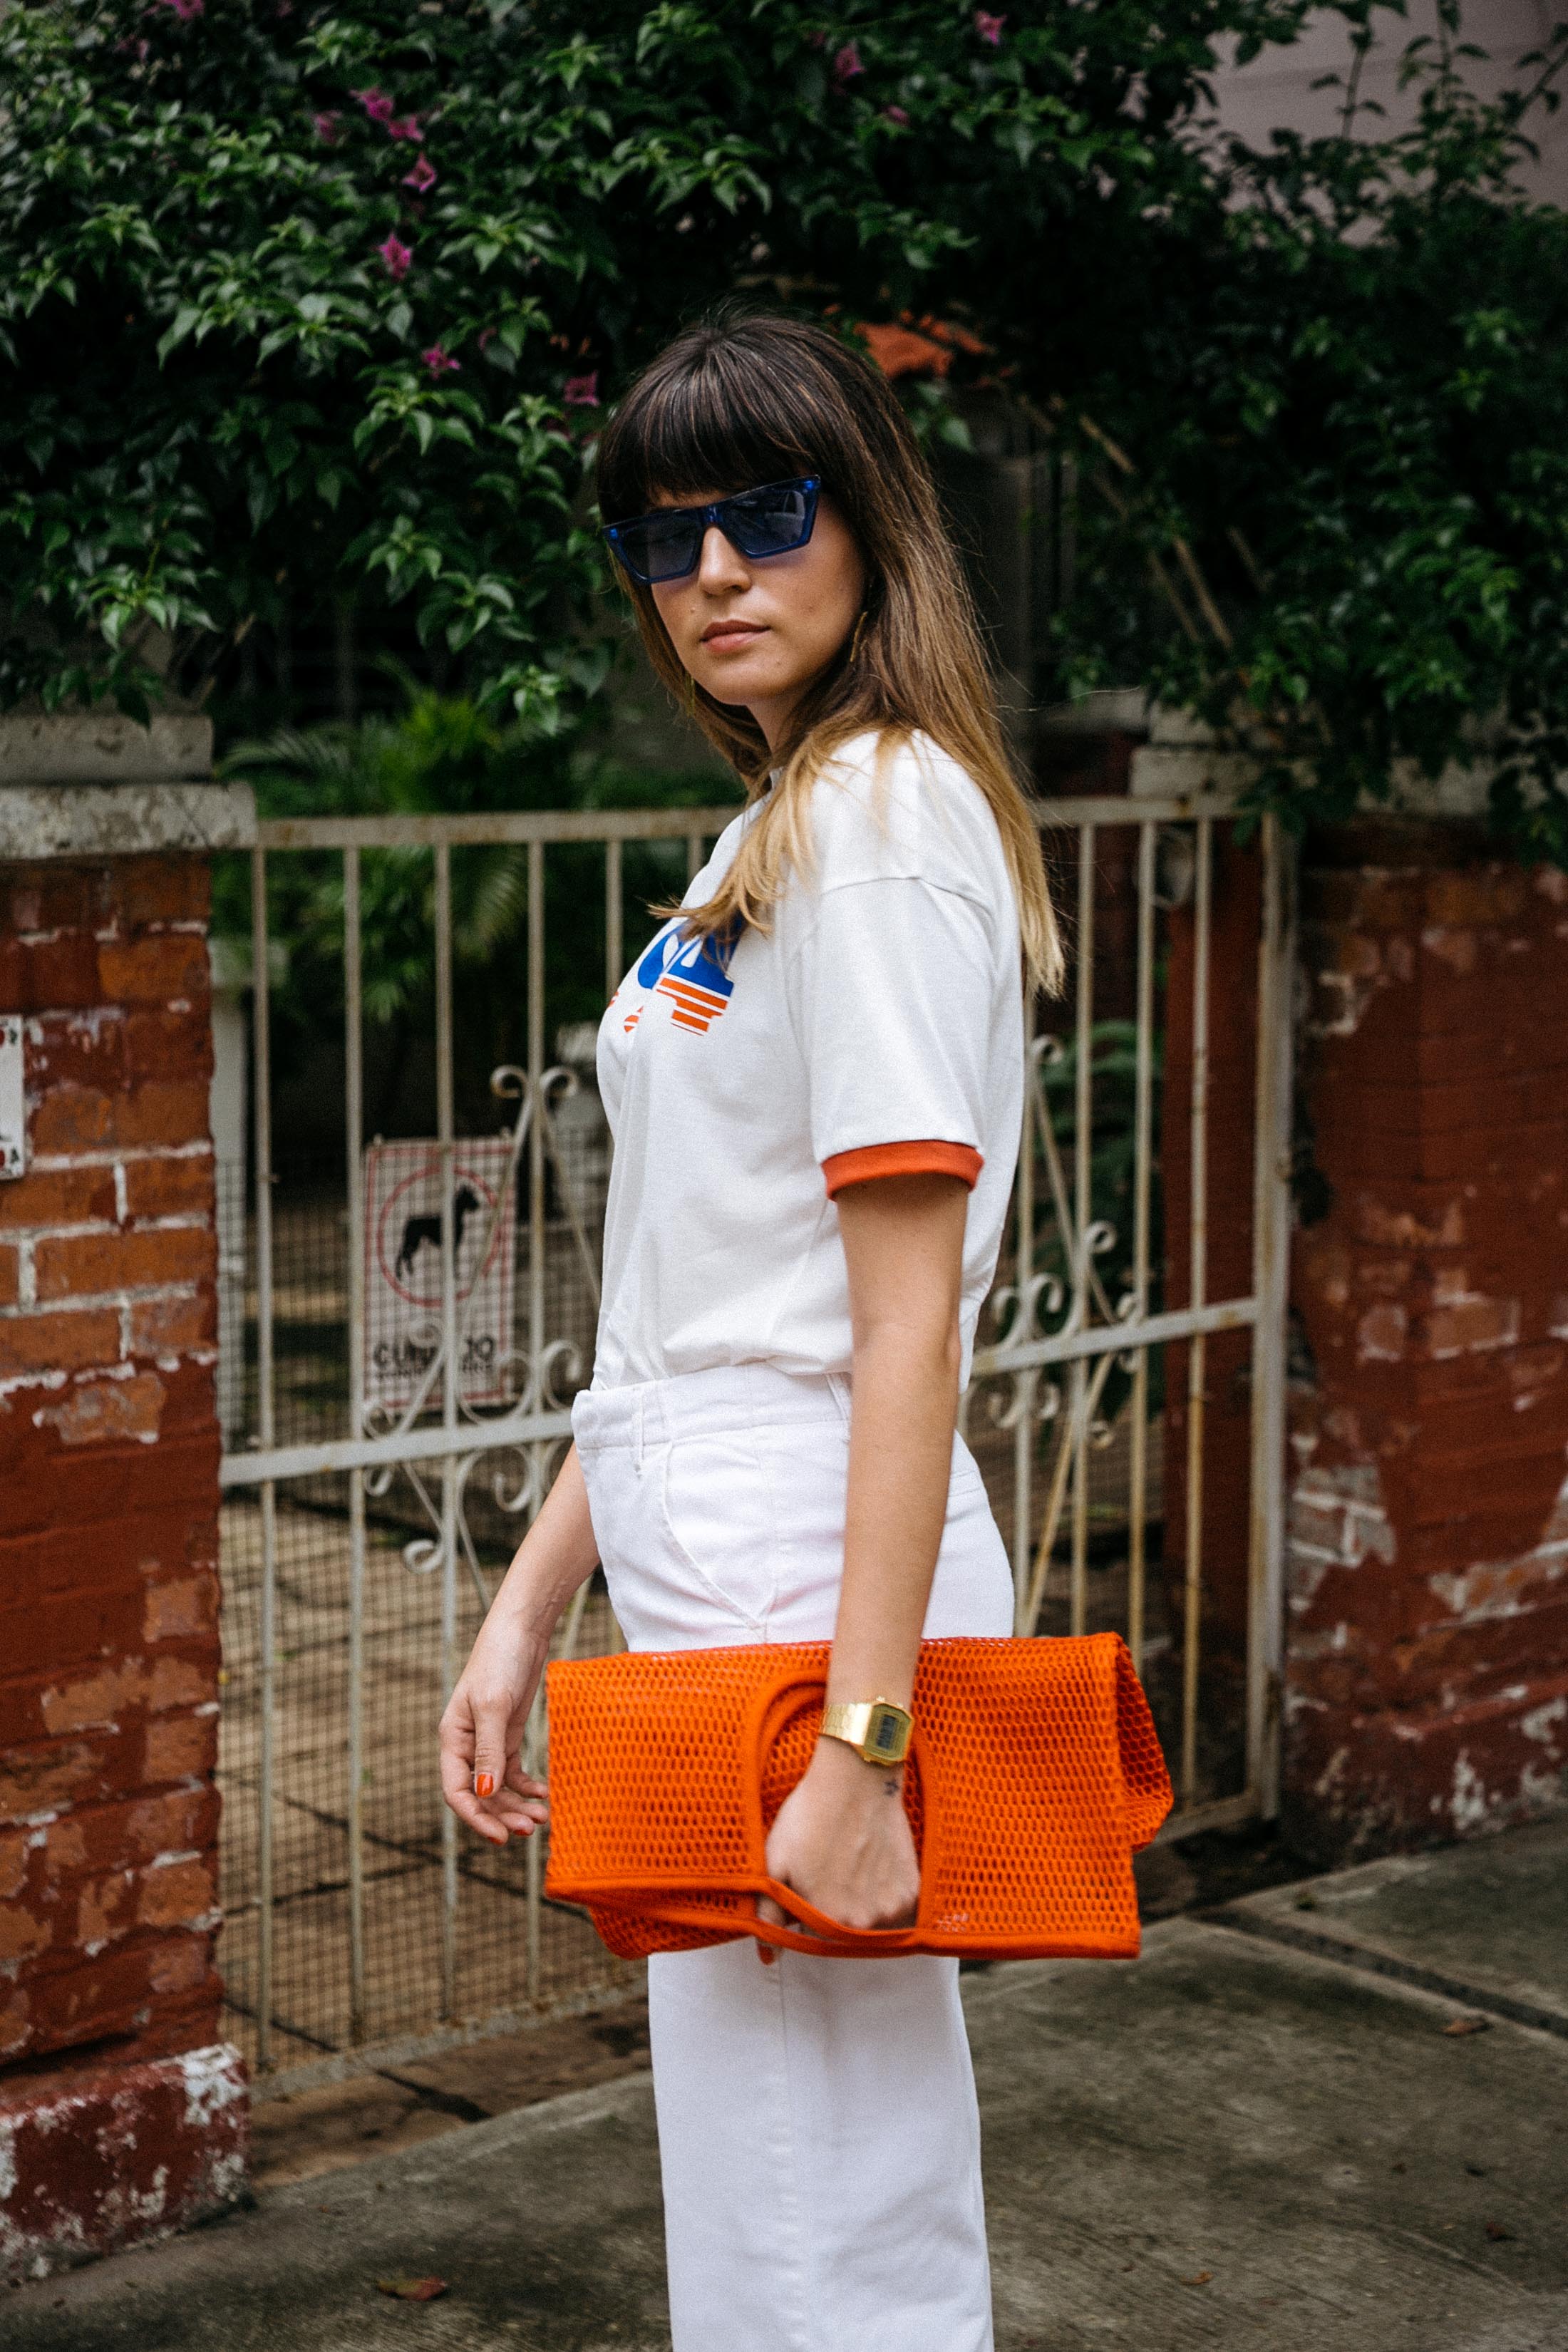 Maristella wearing a ringer tee and net bag from COS